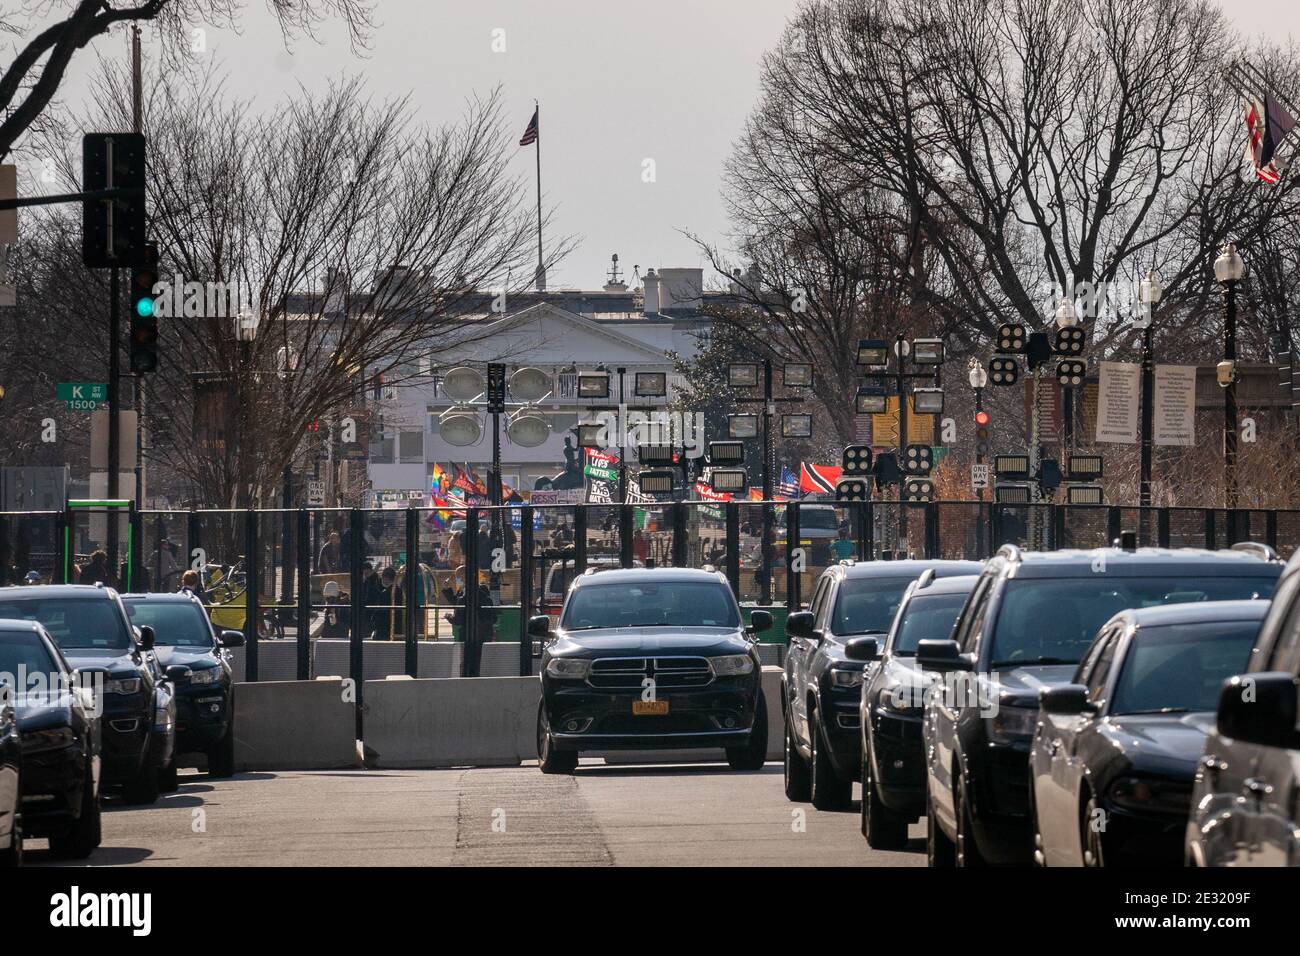 The White House is seen down BLM plaza as inaugural security is tightened ahead of the upcoming inauguration for President Joe Biden January 16, 2021 in Washington DC. Security is even tighter given there recent events when pro-Trump MAGA mobs breached the security perimeter and penetrated the U.S. Capitol back on Jan 6. Photo by Ken Cedeno/Pool/ABACAPRESS.COM Stock Photo